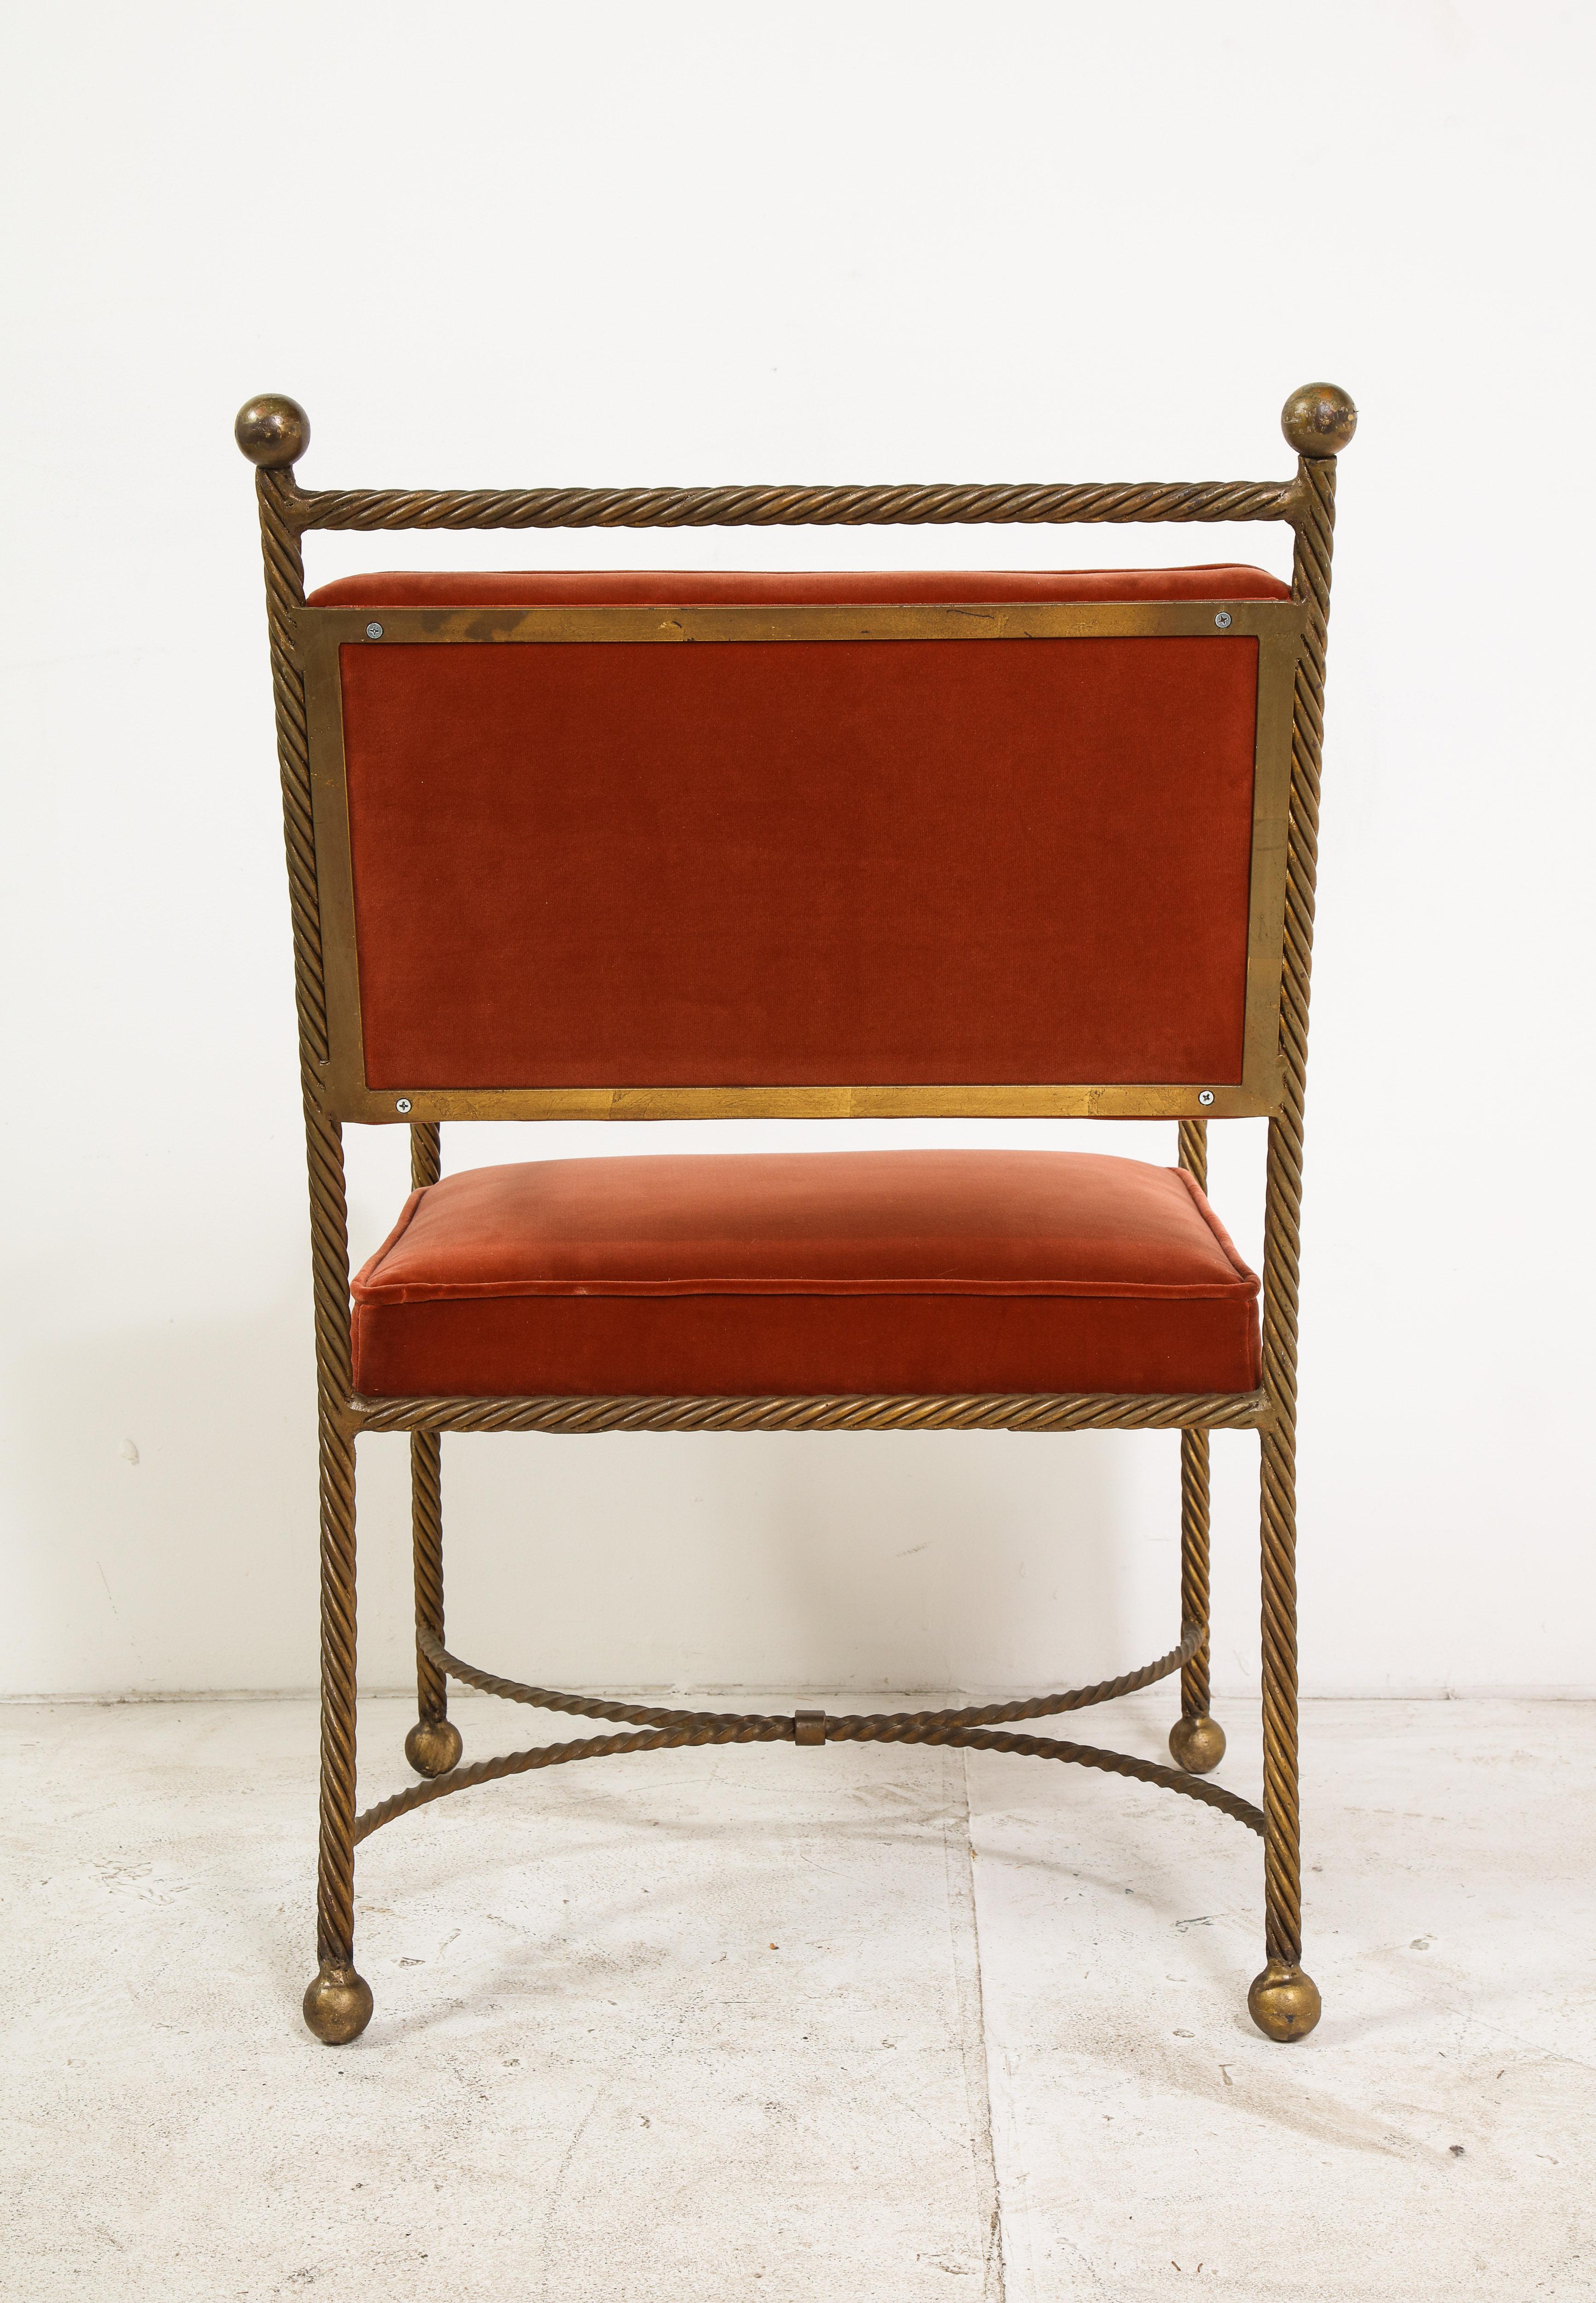 1940s French brass armchair with rope detail and ball feet. Rose velvet upholstery on back and seat is brand new, done in spring 2019, never used. 

Arm height: 22